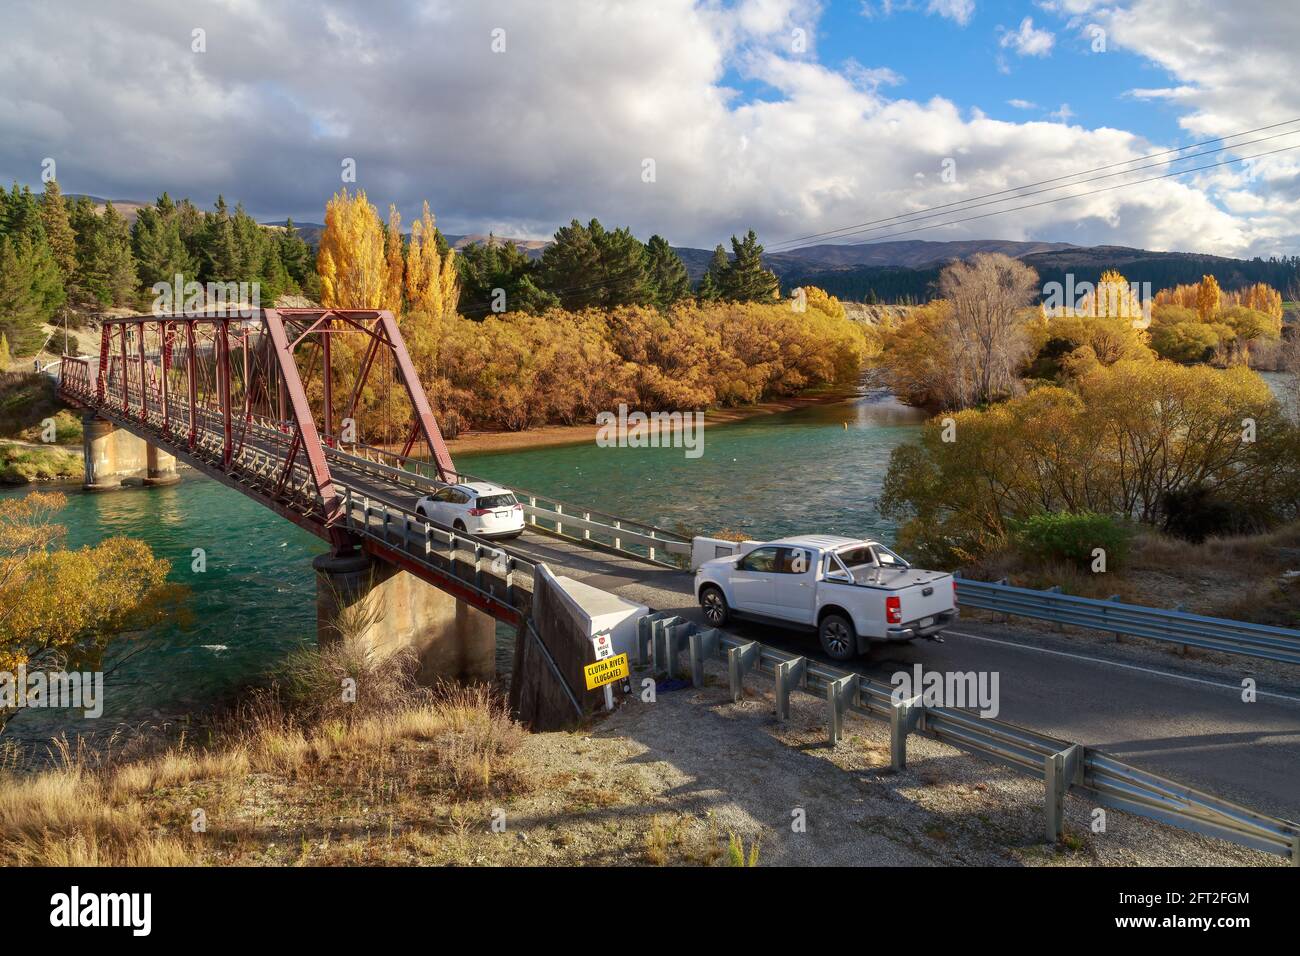 The historic Red Bridge (built 1915) over the Clutha River, Otago, New Zealand, in autumn Stock Photo